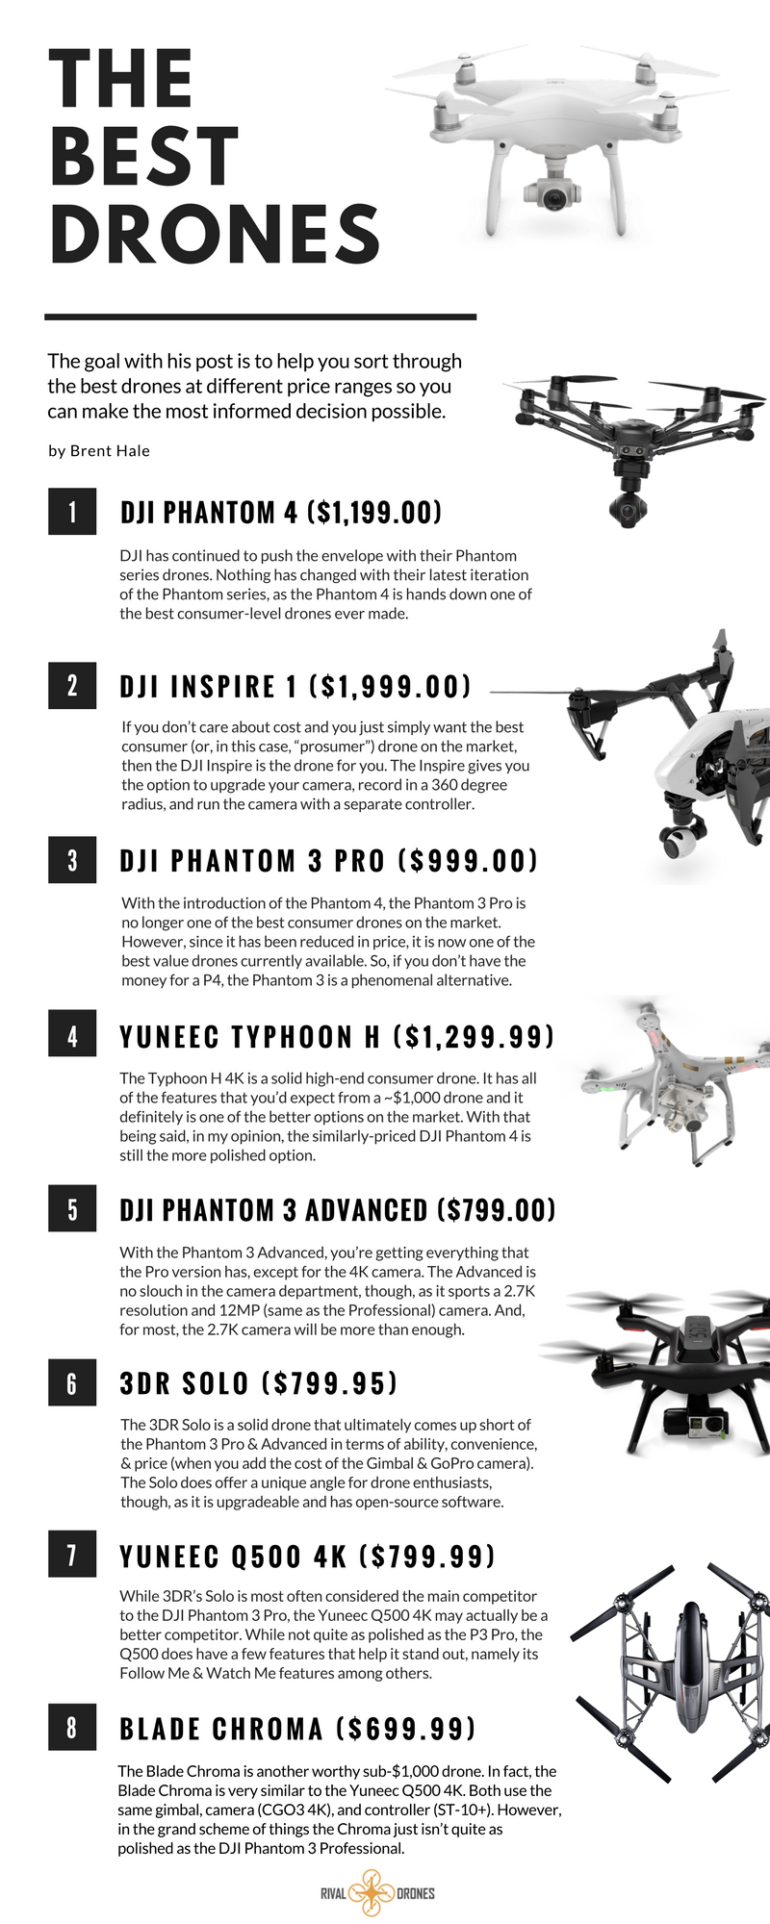 The Best Drones for Sale